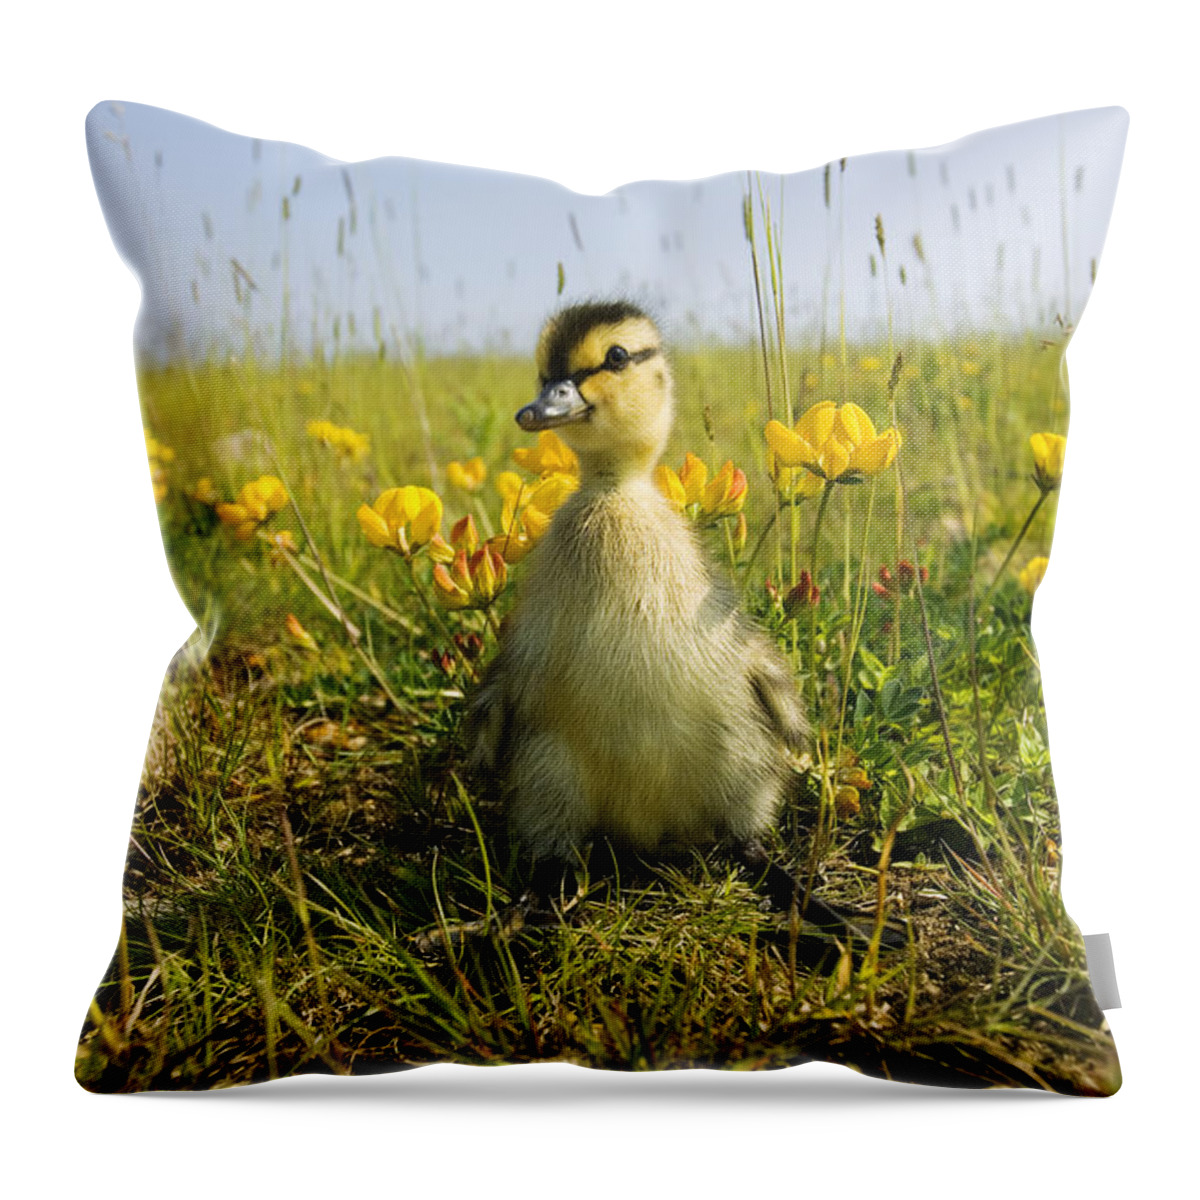 Vertebrate Throw Pillow featuring the photograph Mallard, Anas Platyrhynchos, Duckling by Mike Powles